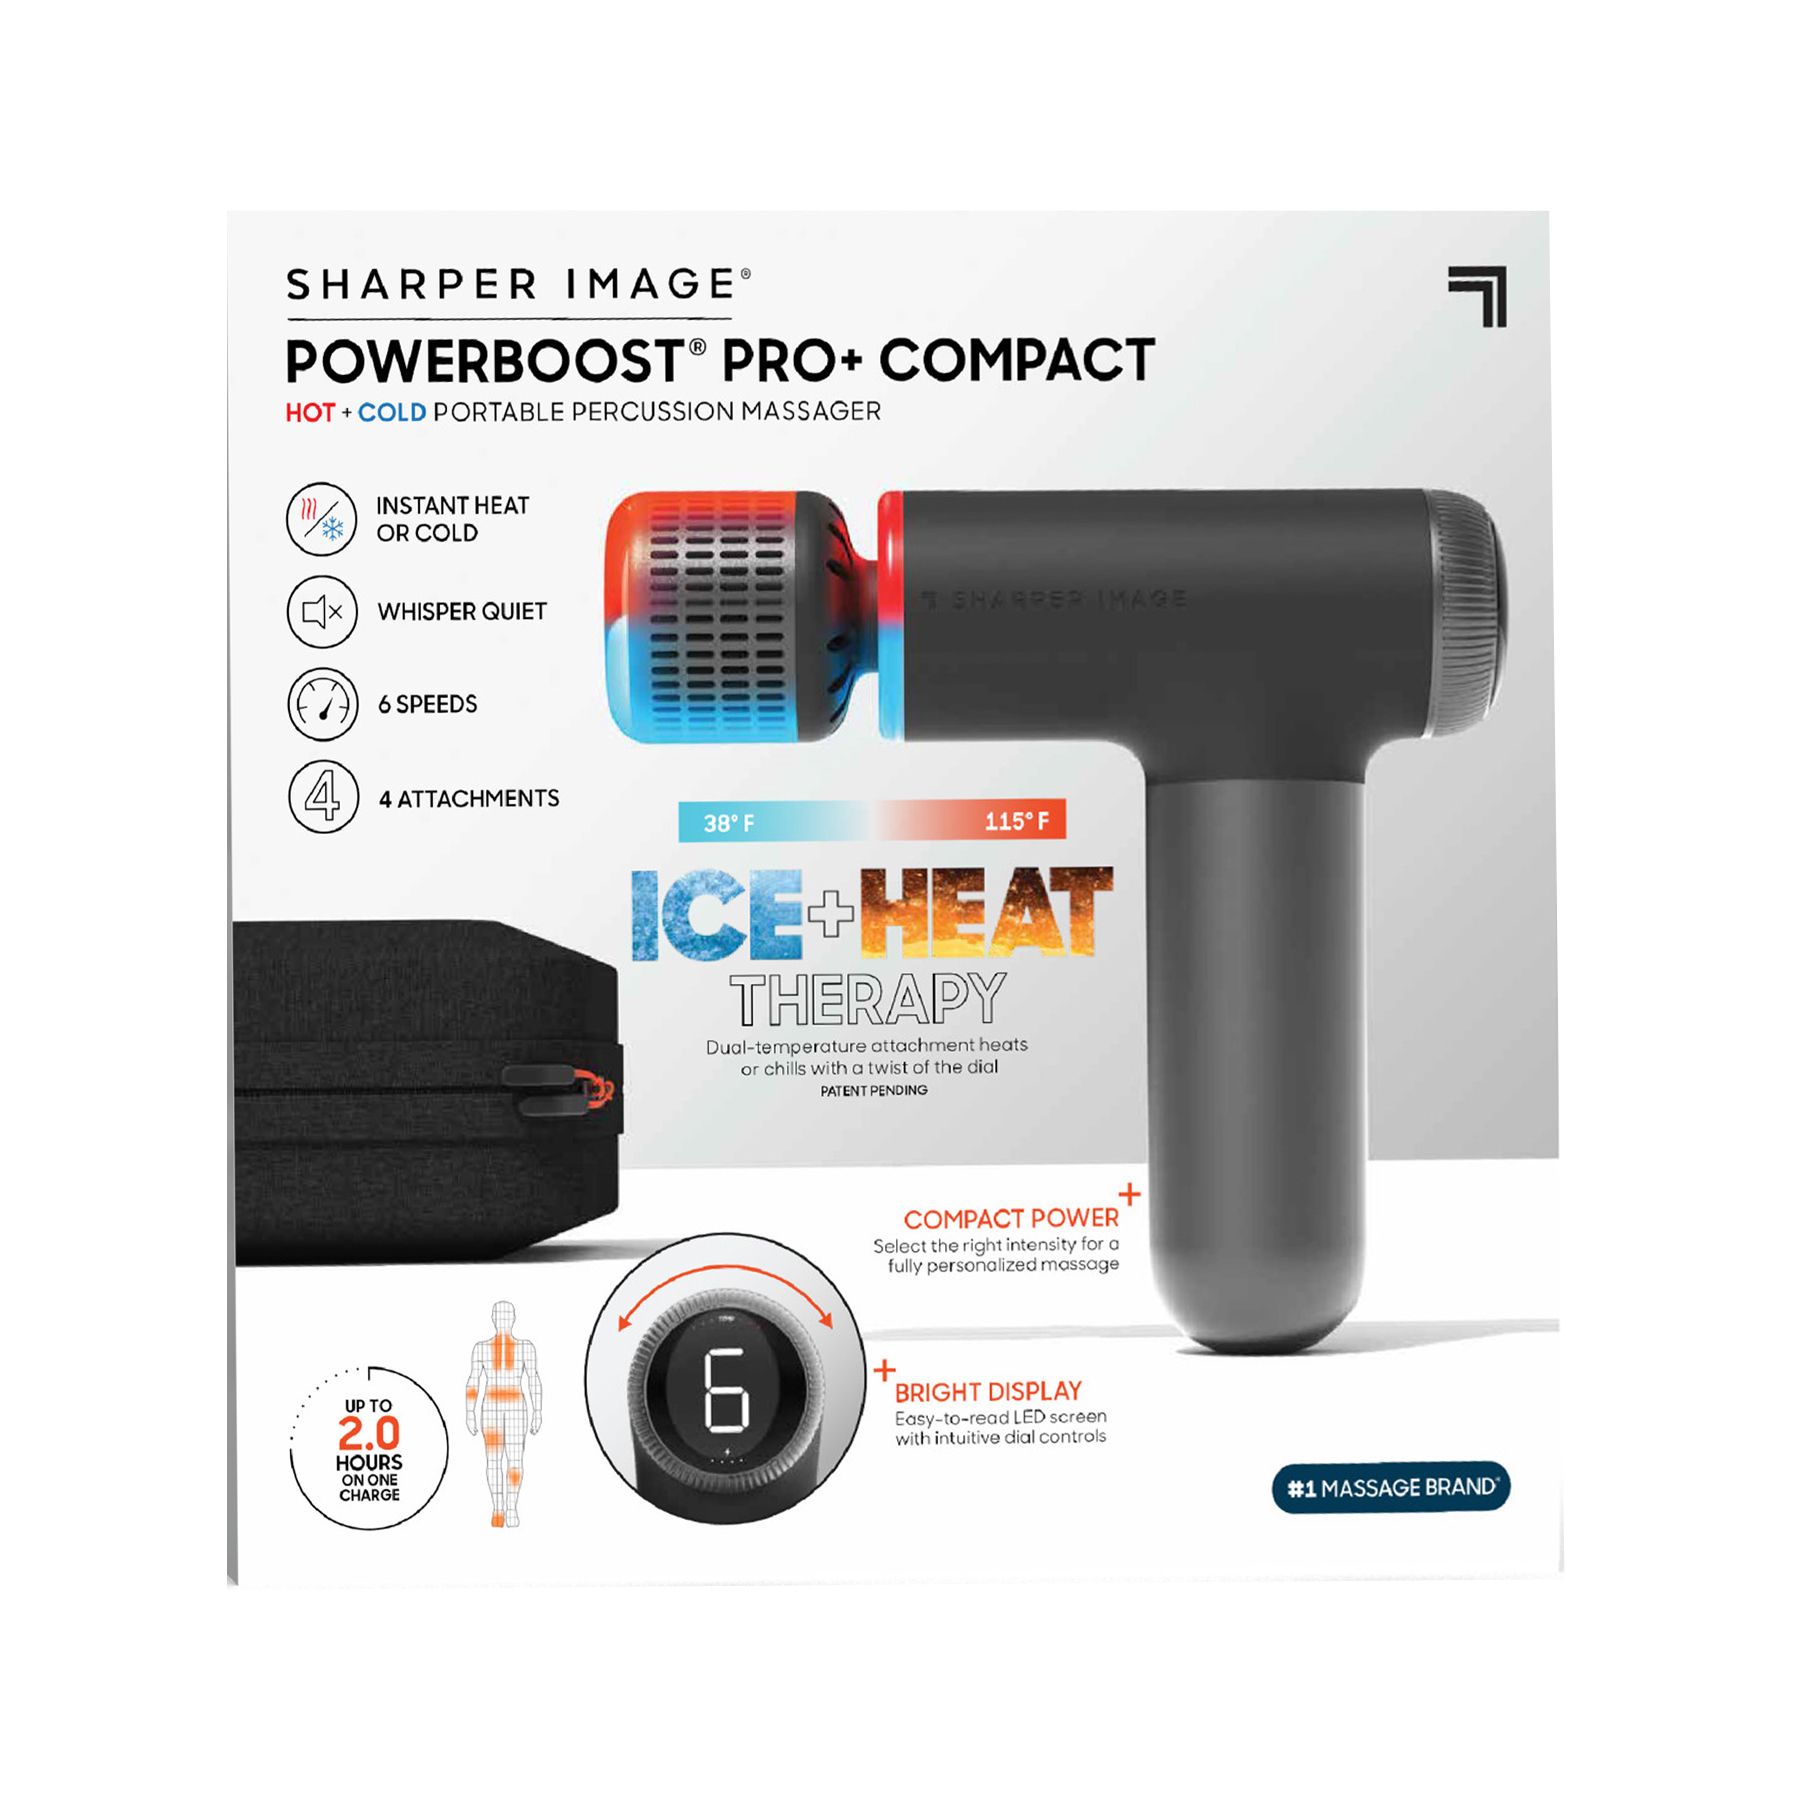 Sharper Image Powerboost Pro+ Compact Hot and Cold Percussion Massager - Black